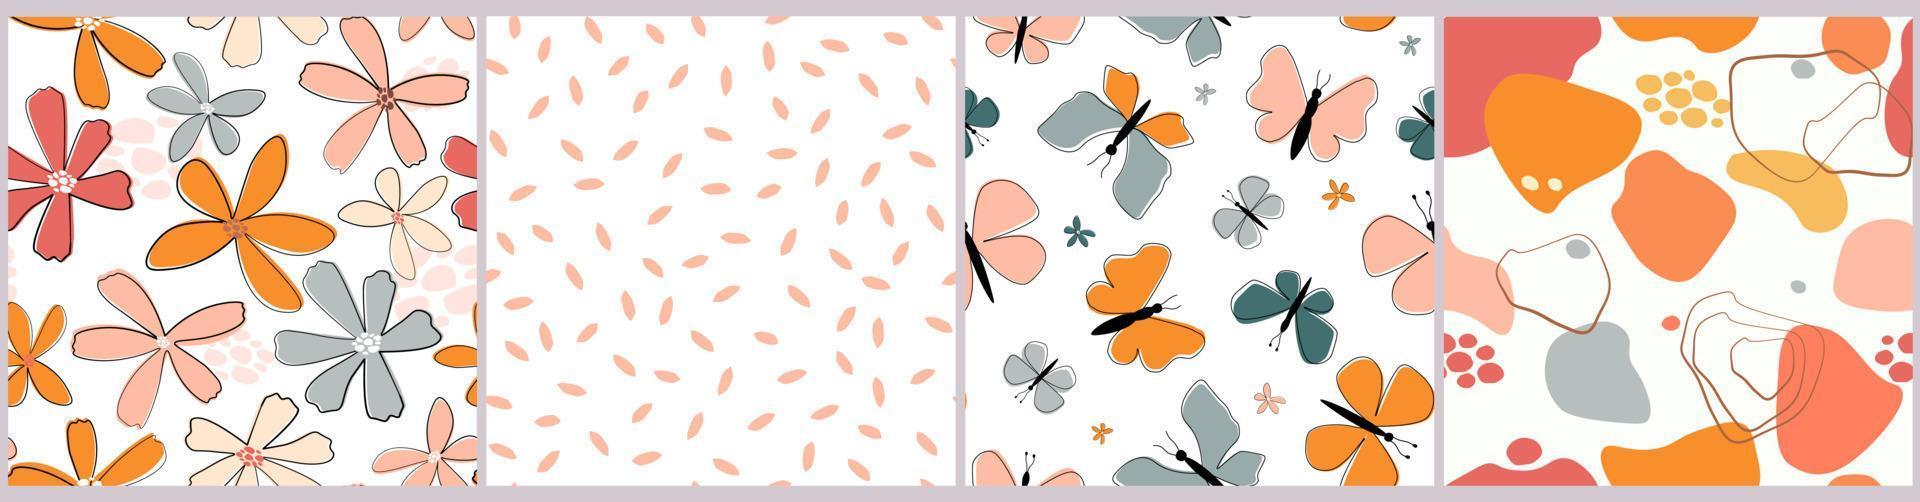 A set of seamless patterns with a summer floral print. Colorful butterflies, simple abstract shapes. Vector graphics.